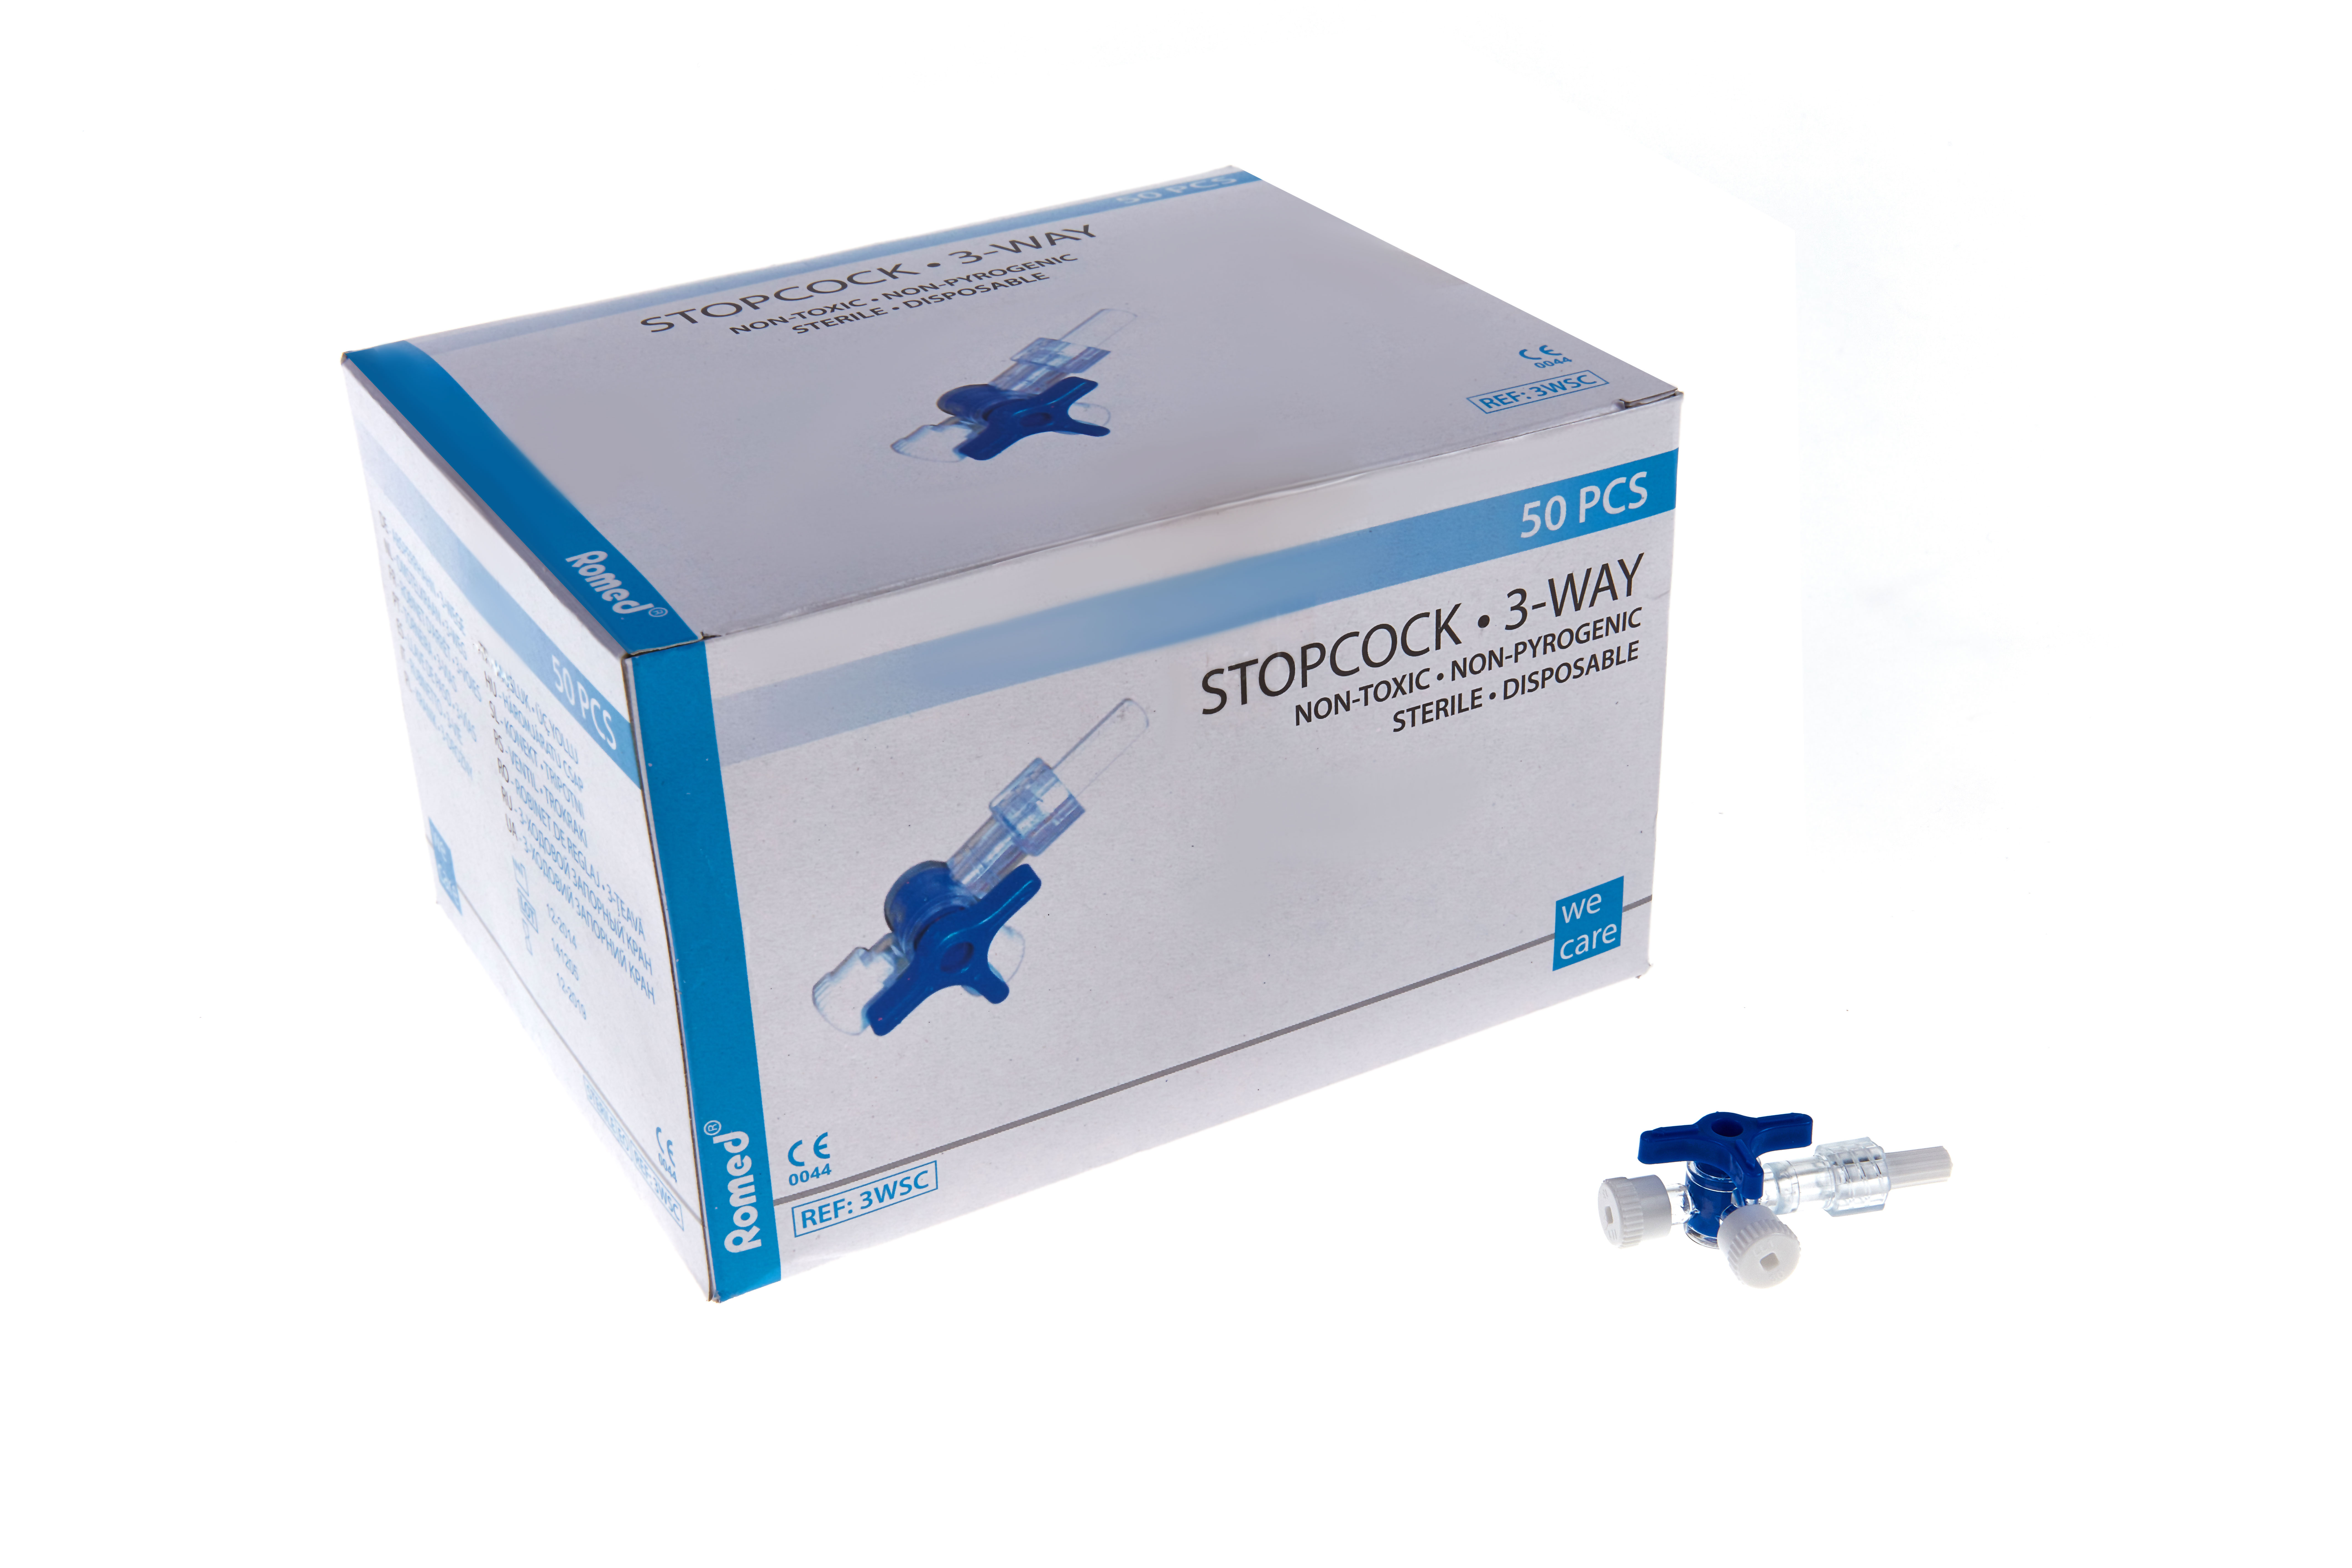 3WSC Romed stop cocks, 3-way, sterile per piece in blister pack, 50 pcs in inner box, 20 x 50 pcs = 1.000 pcs in a carton.